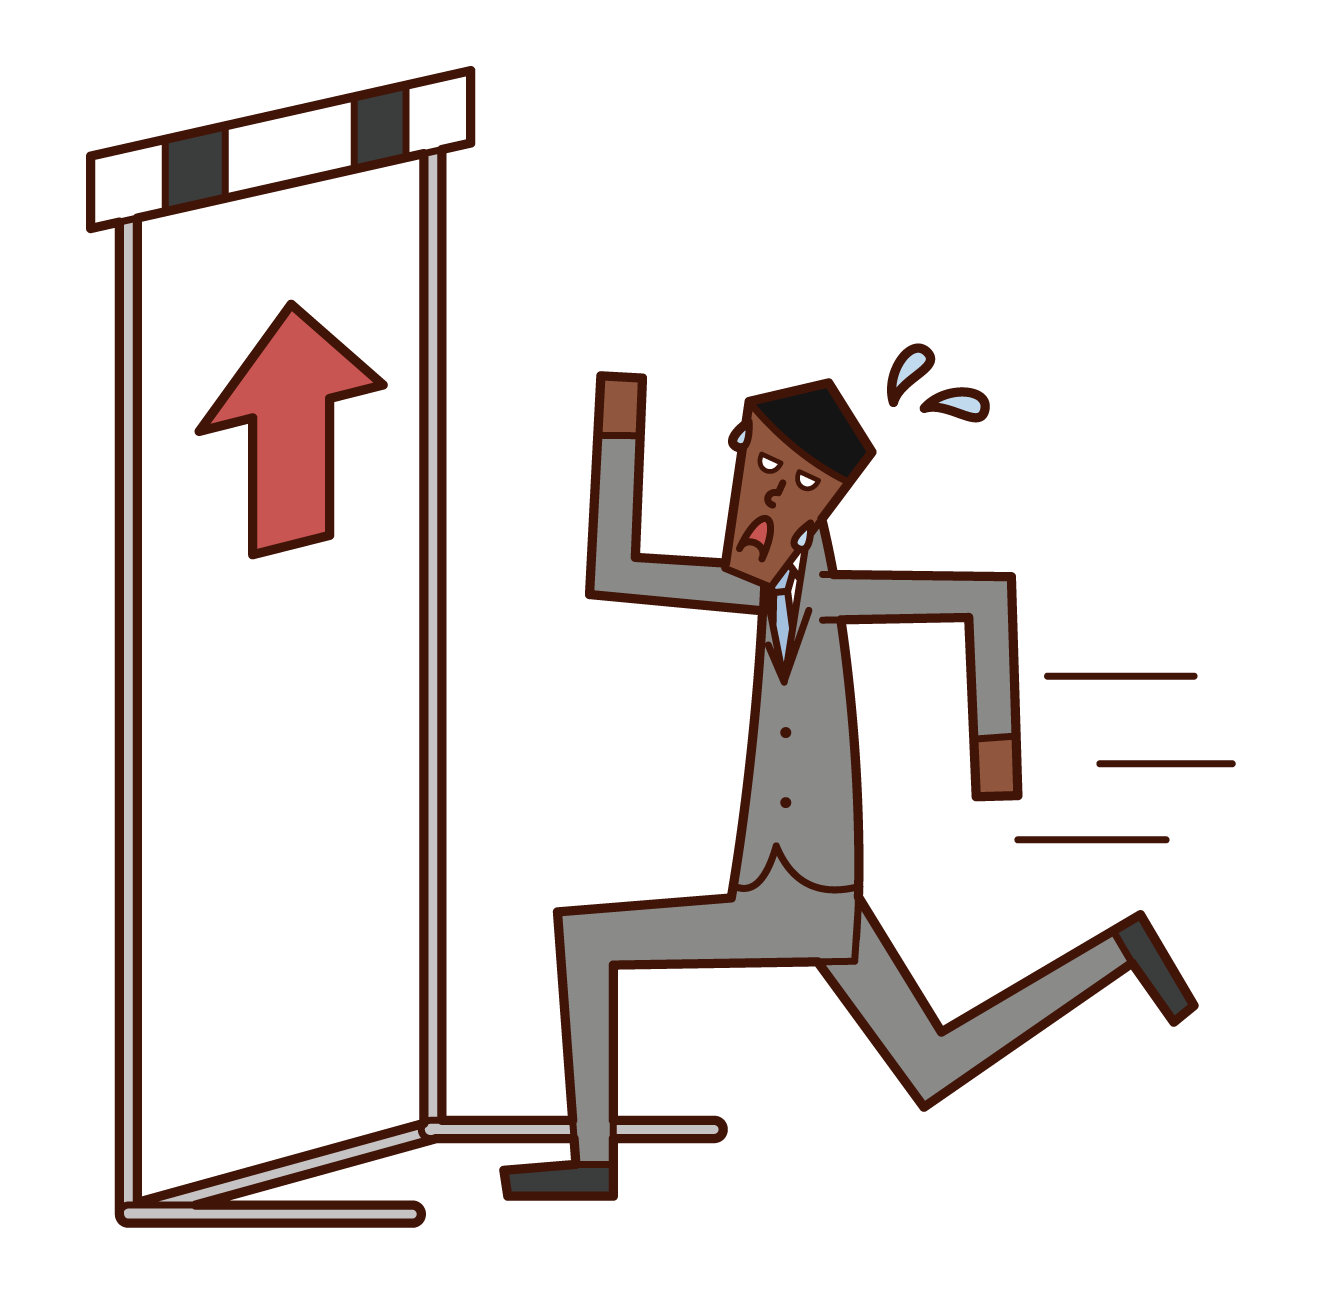 Illustration of a person (male) facing a high hurdle